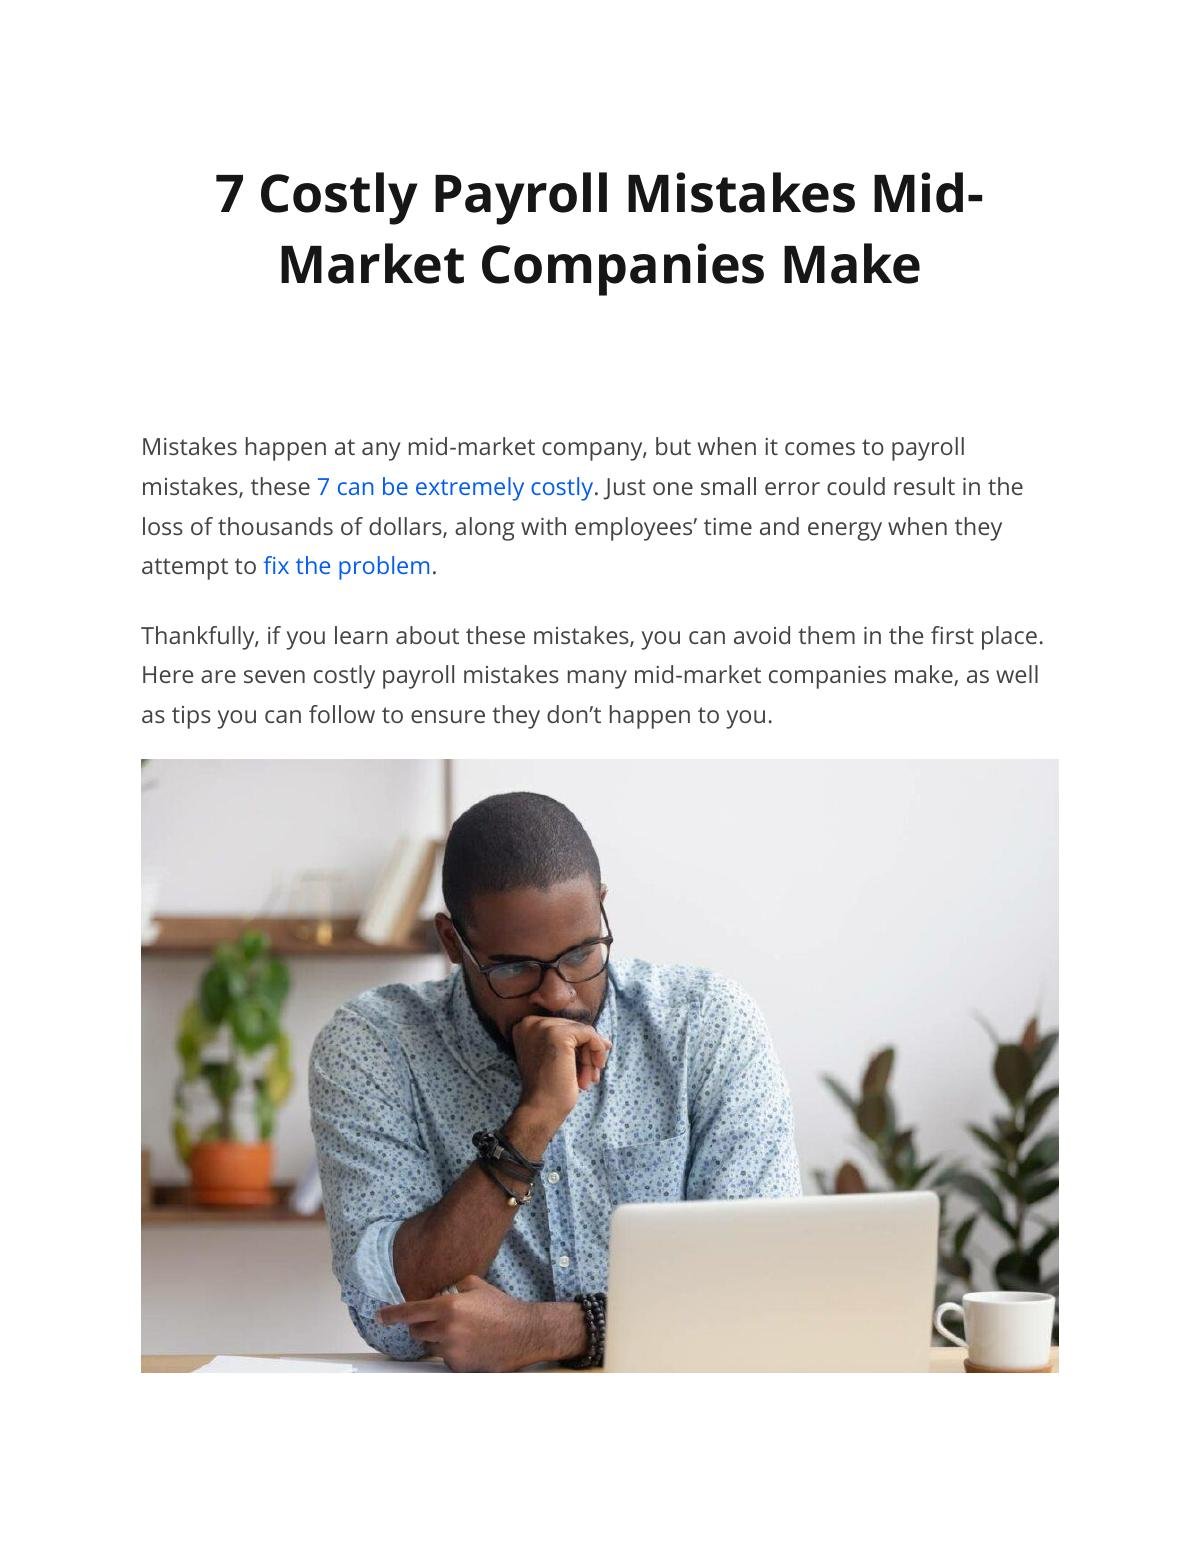 7 Costly Payroll Mistakes Mid-Market Companies Make